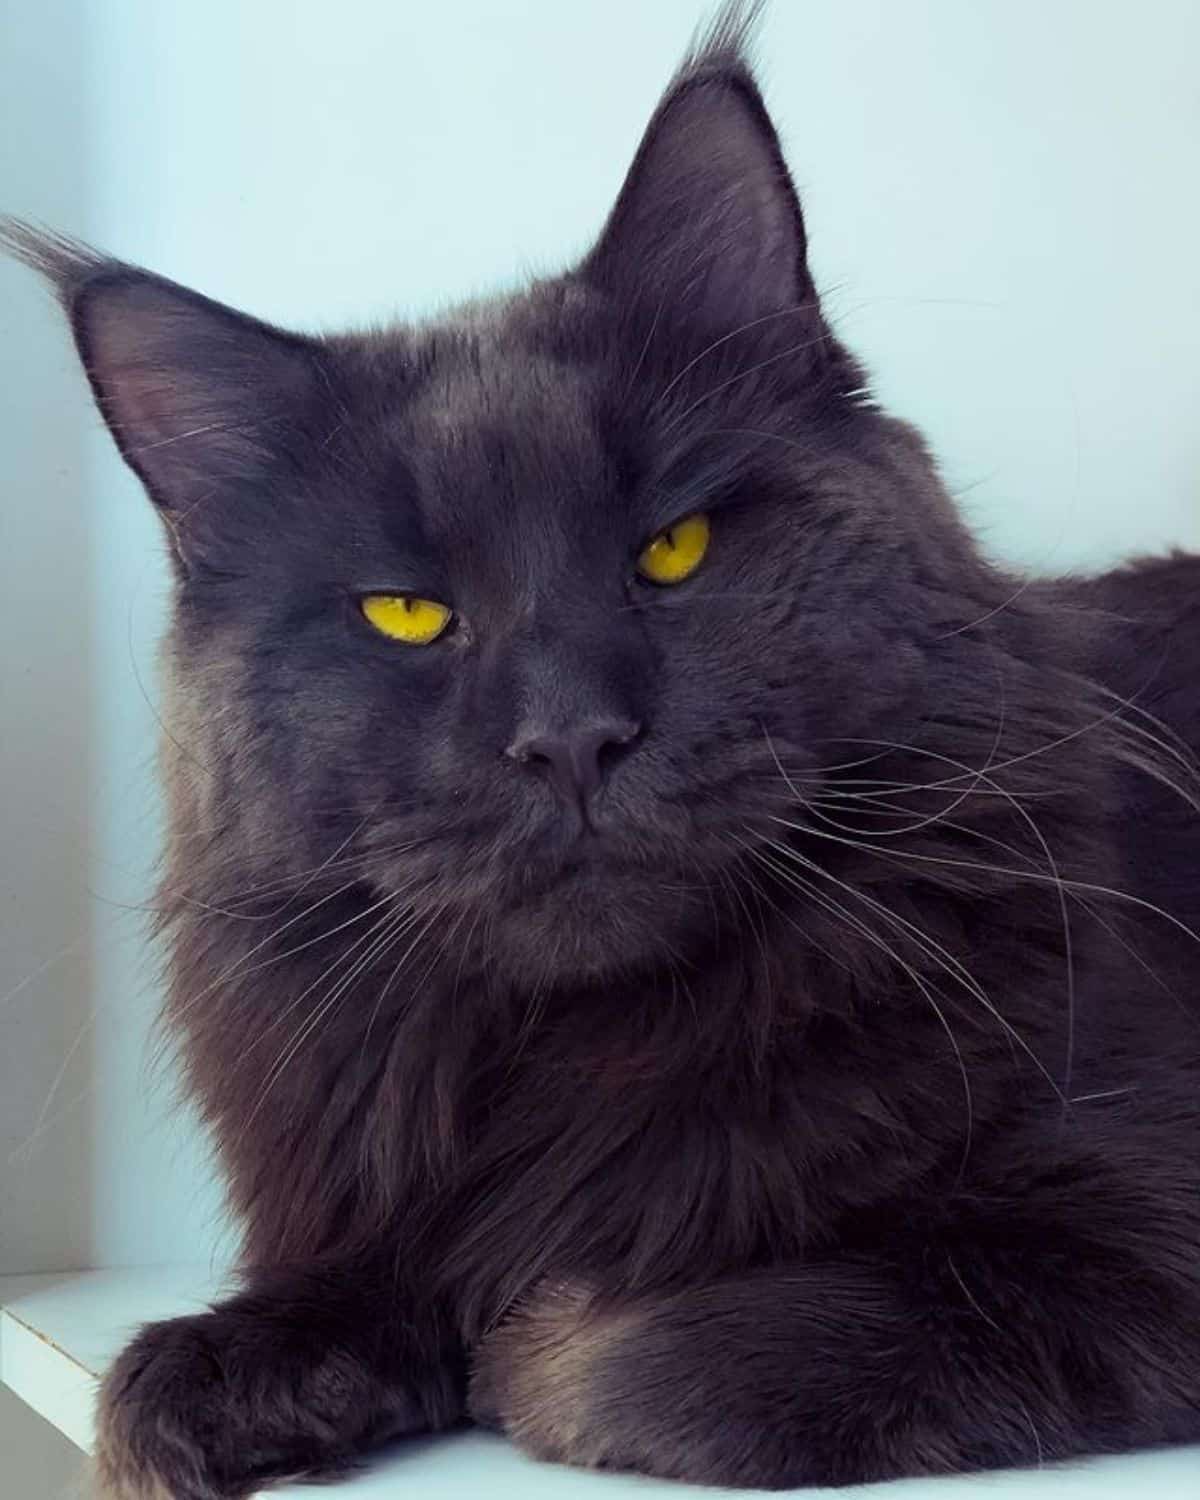 A mean-looking black maine coon with golden eyes lying on a shelf.